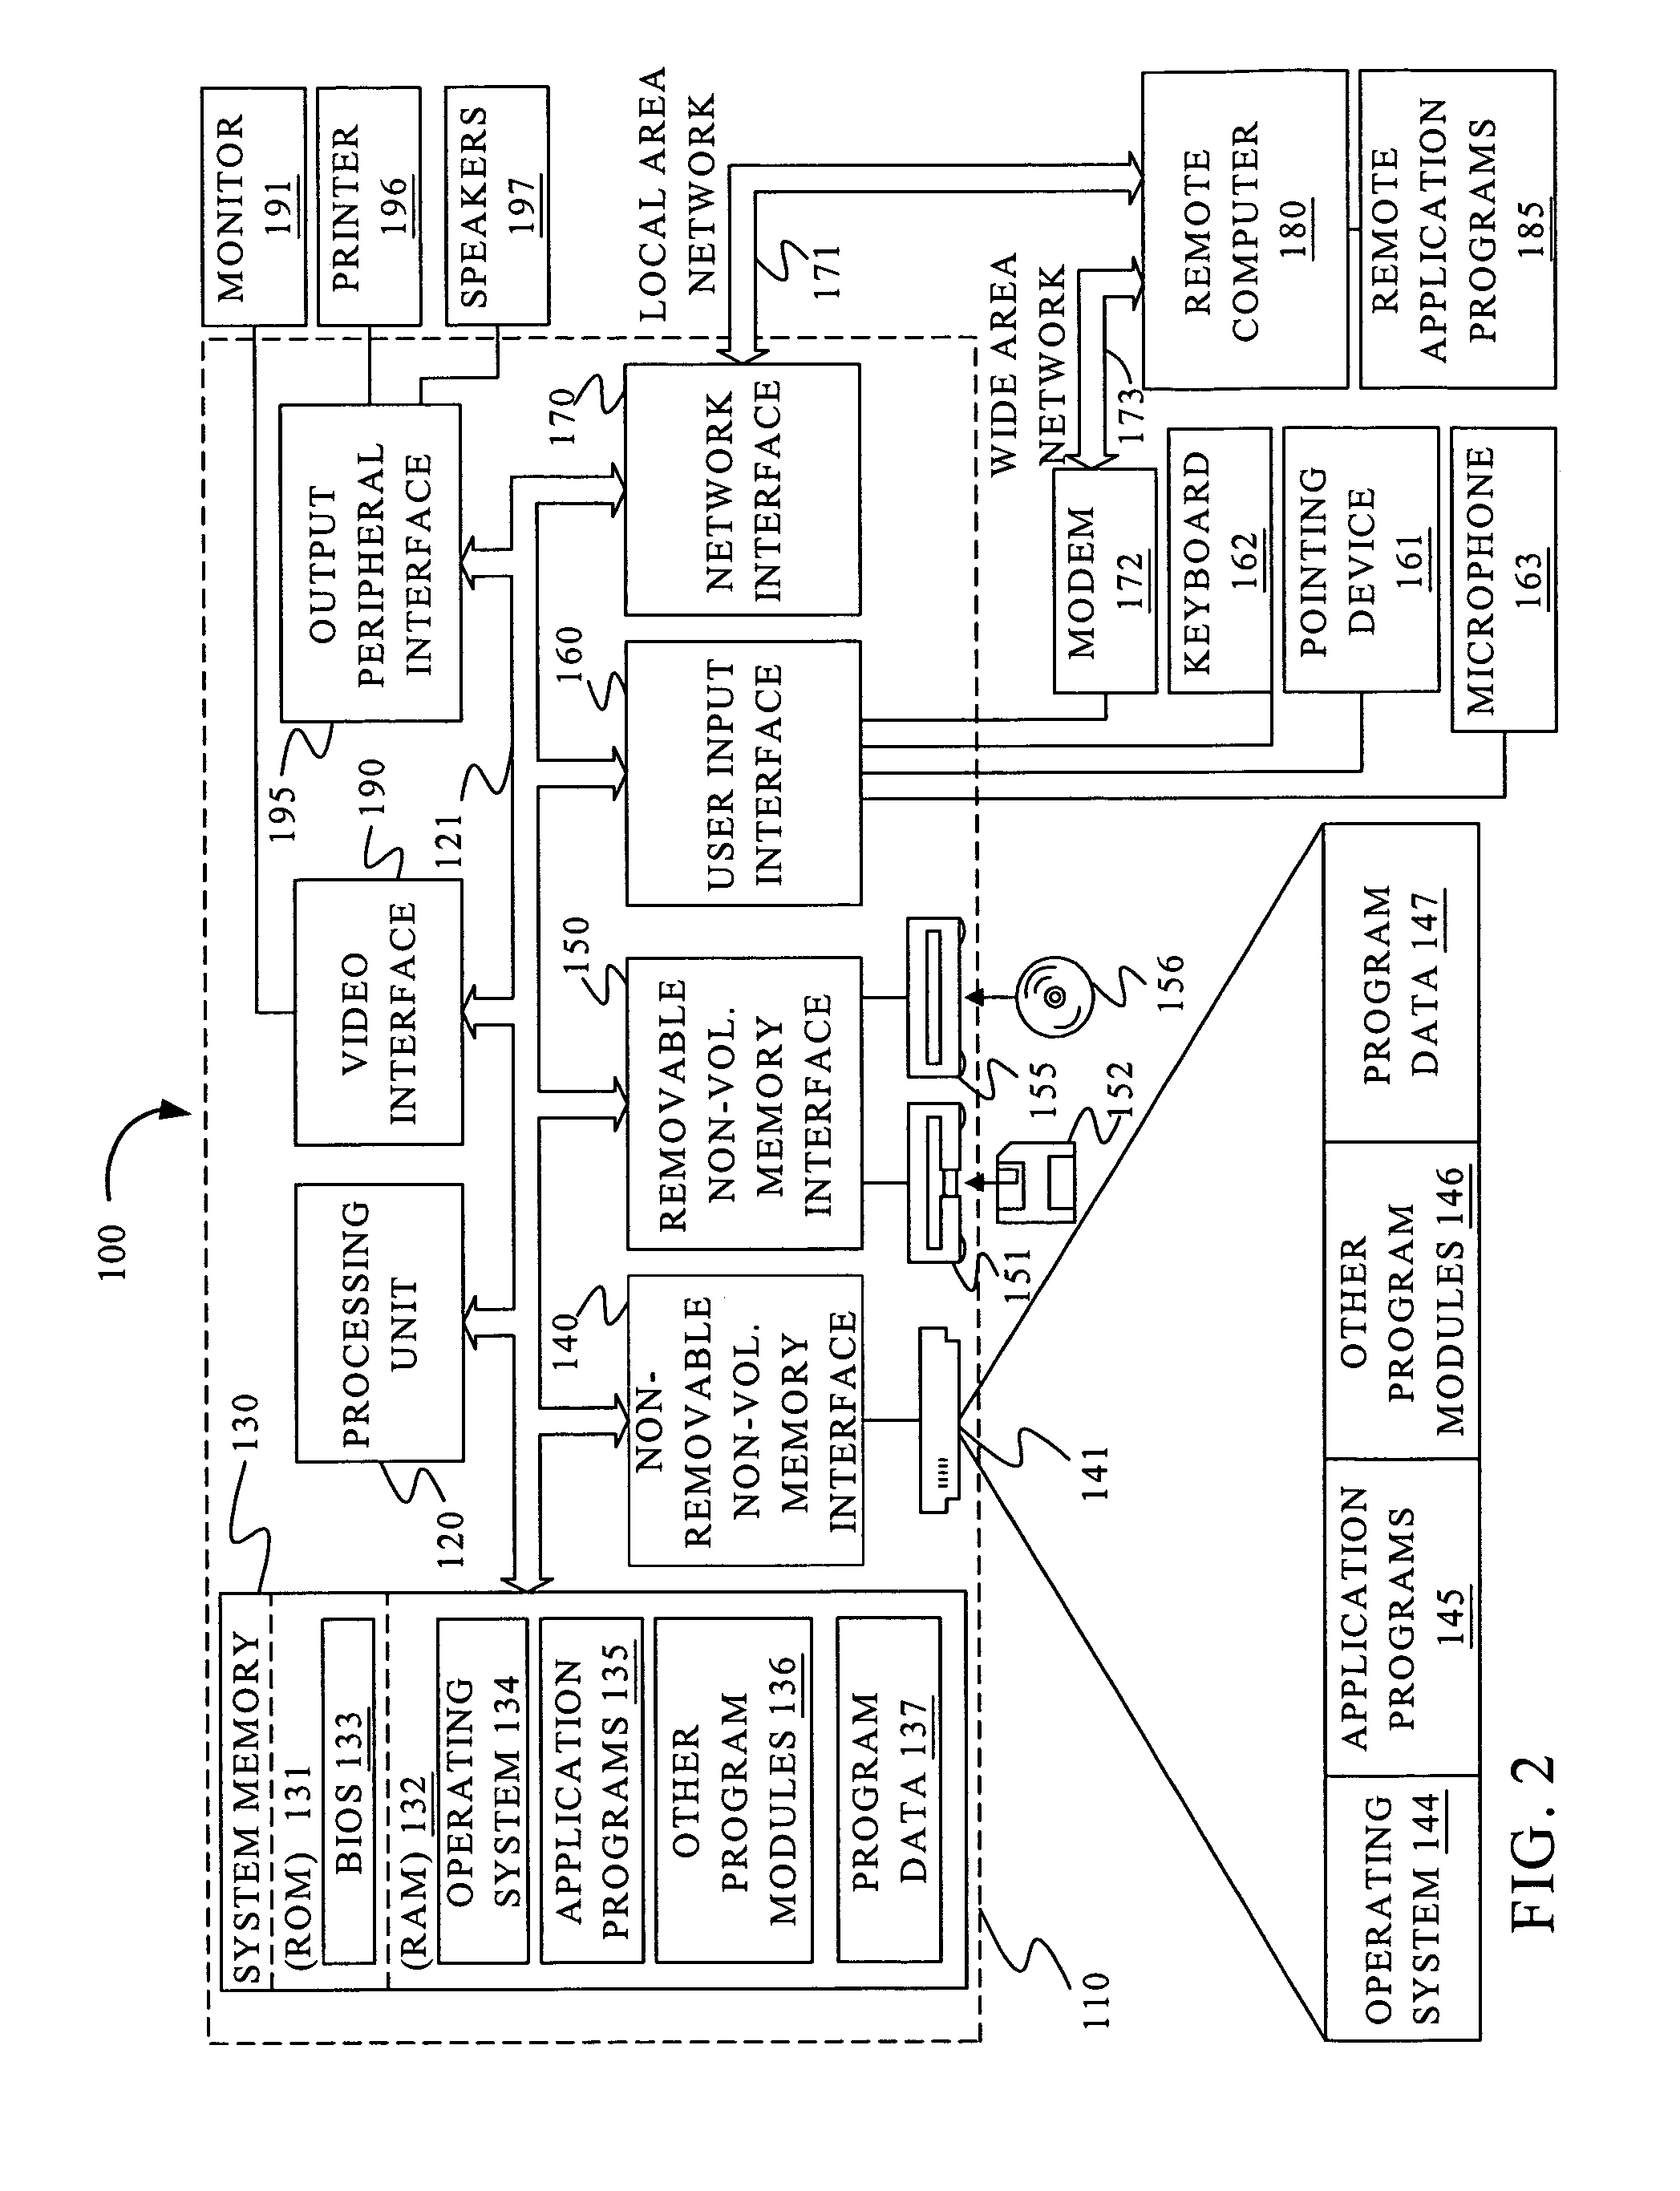 Performing operations on a set of objects in a database system